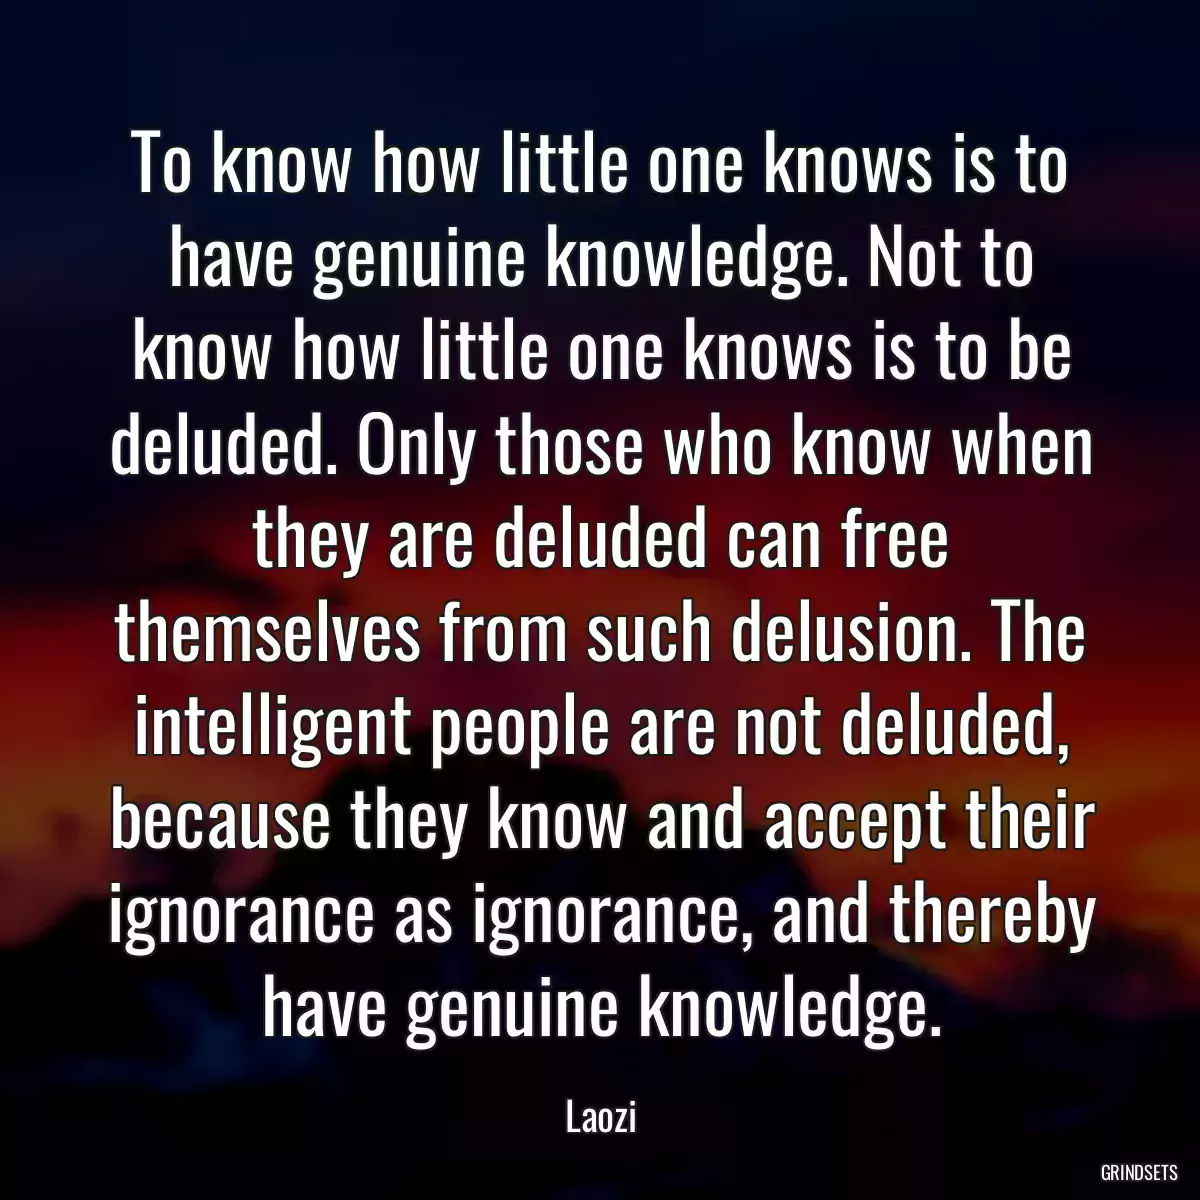 To know how little one knows is to have genuine knowledge. Not to know how little one knows is to be deluded. Only those who know when they are deluded can free themselves from such delusion. The intelligent people are not deluded, because they know and accept their ignorance as ignorance, and thereby have genuine knowledge.